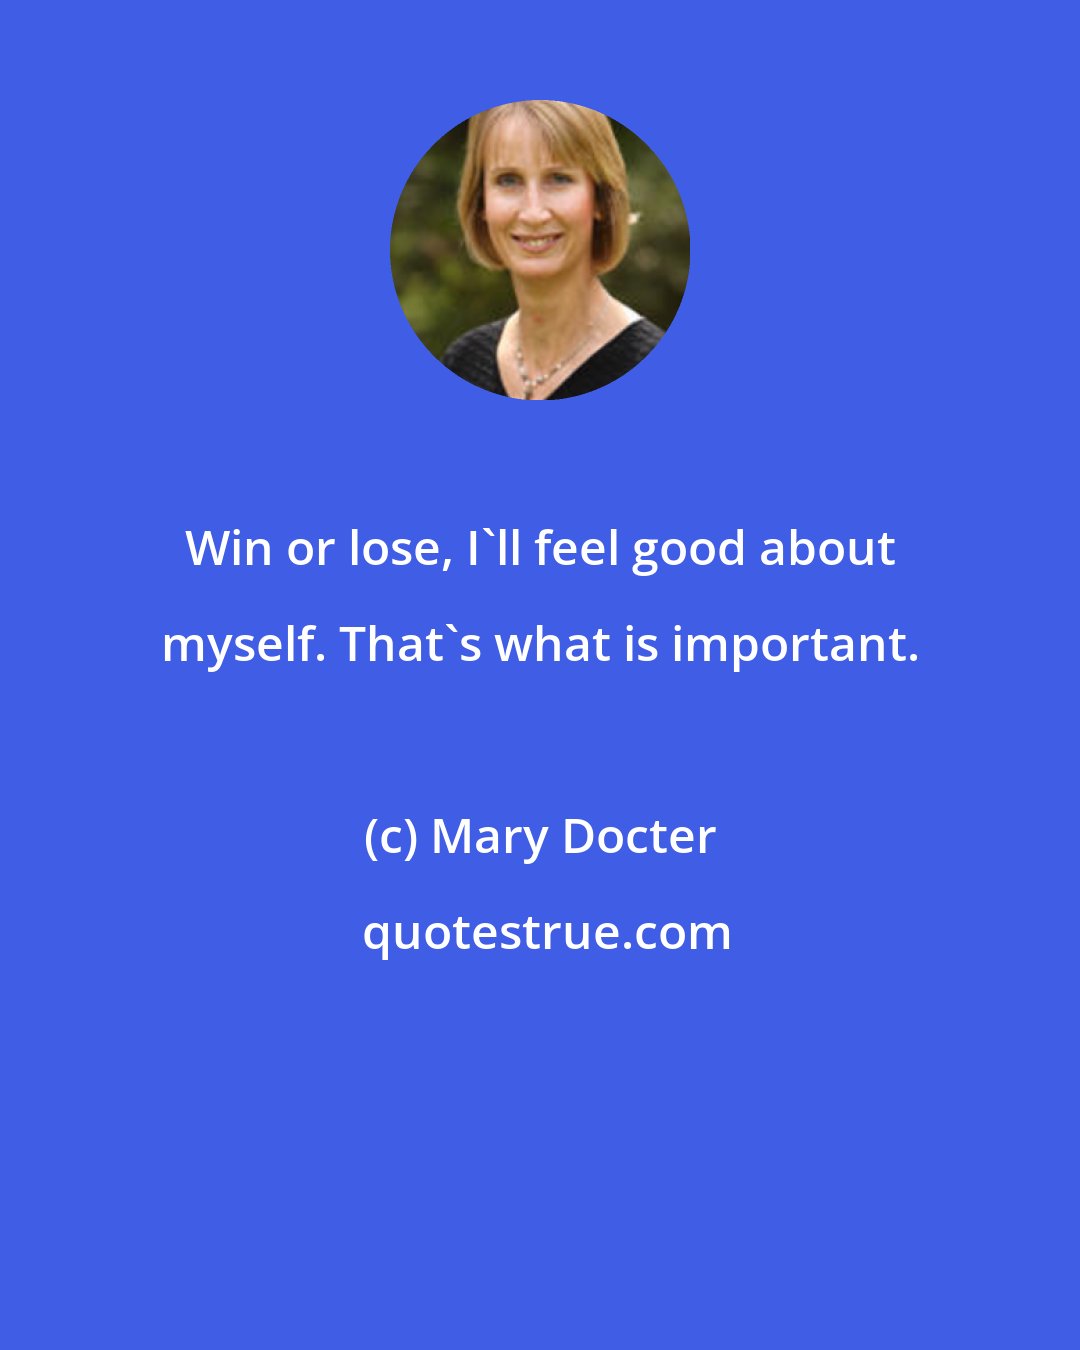 Mary Docter: Win or lose, I'll feel good about myself. That's what is important.